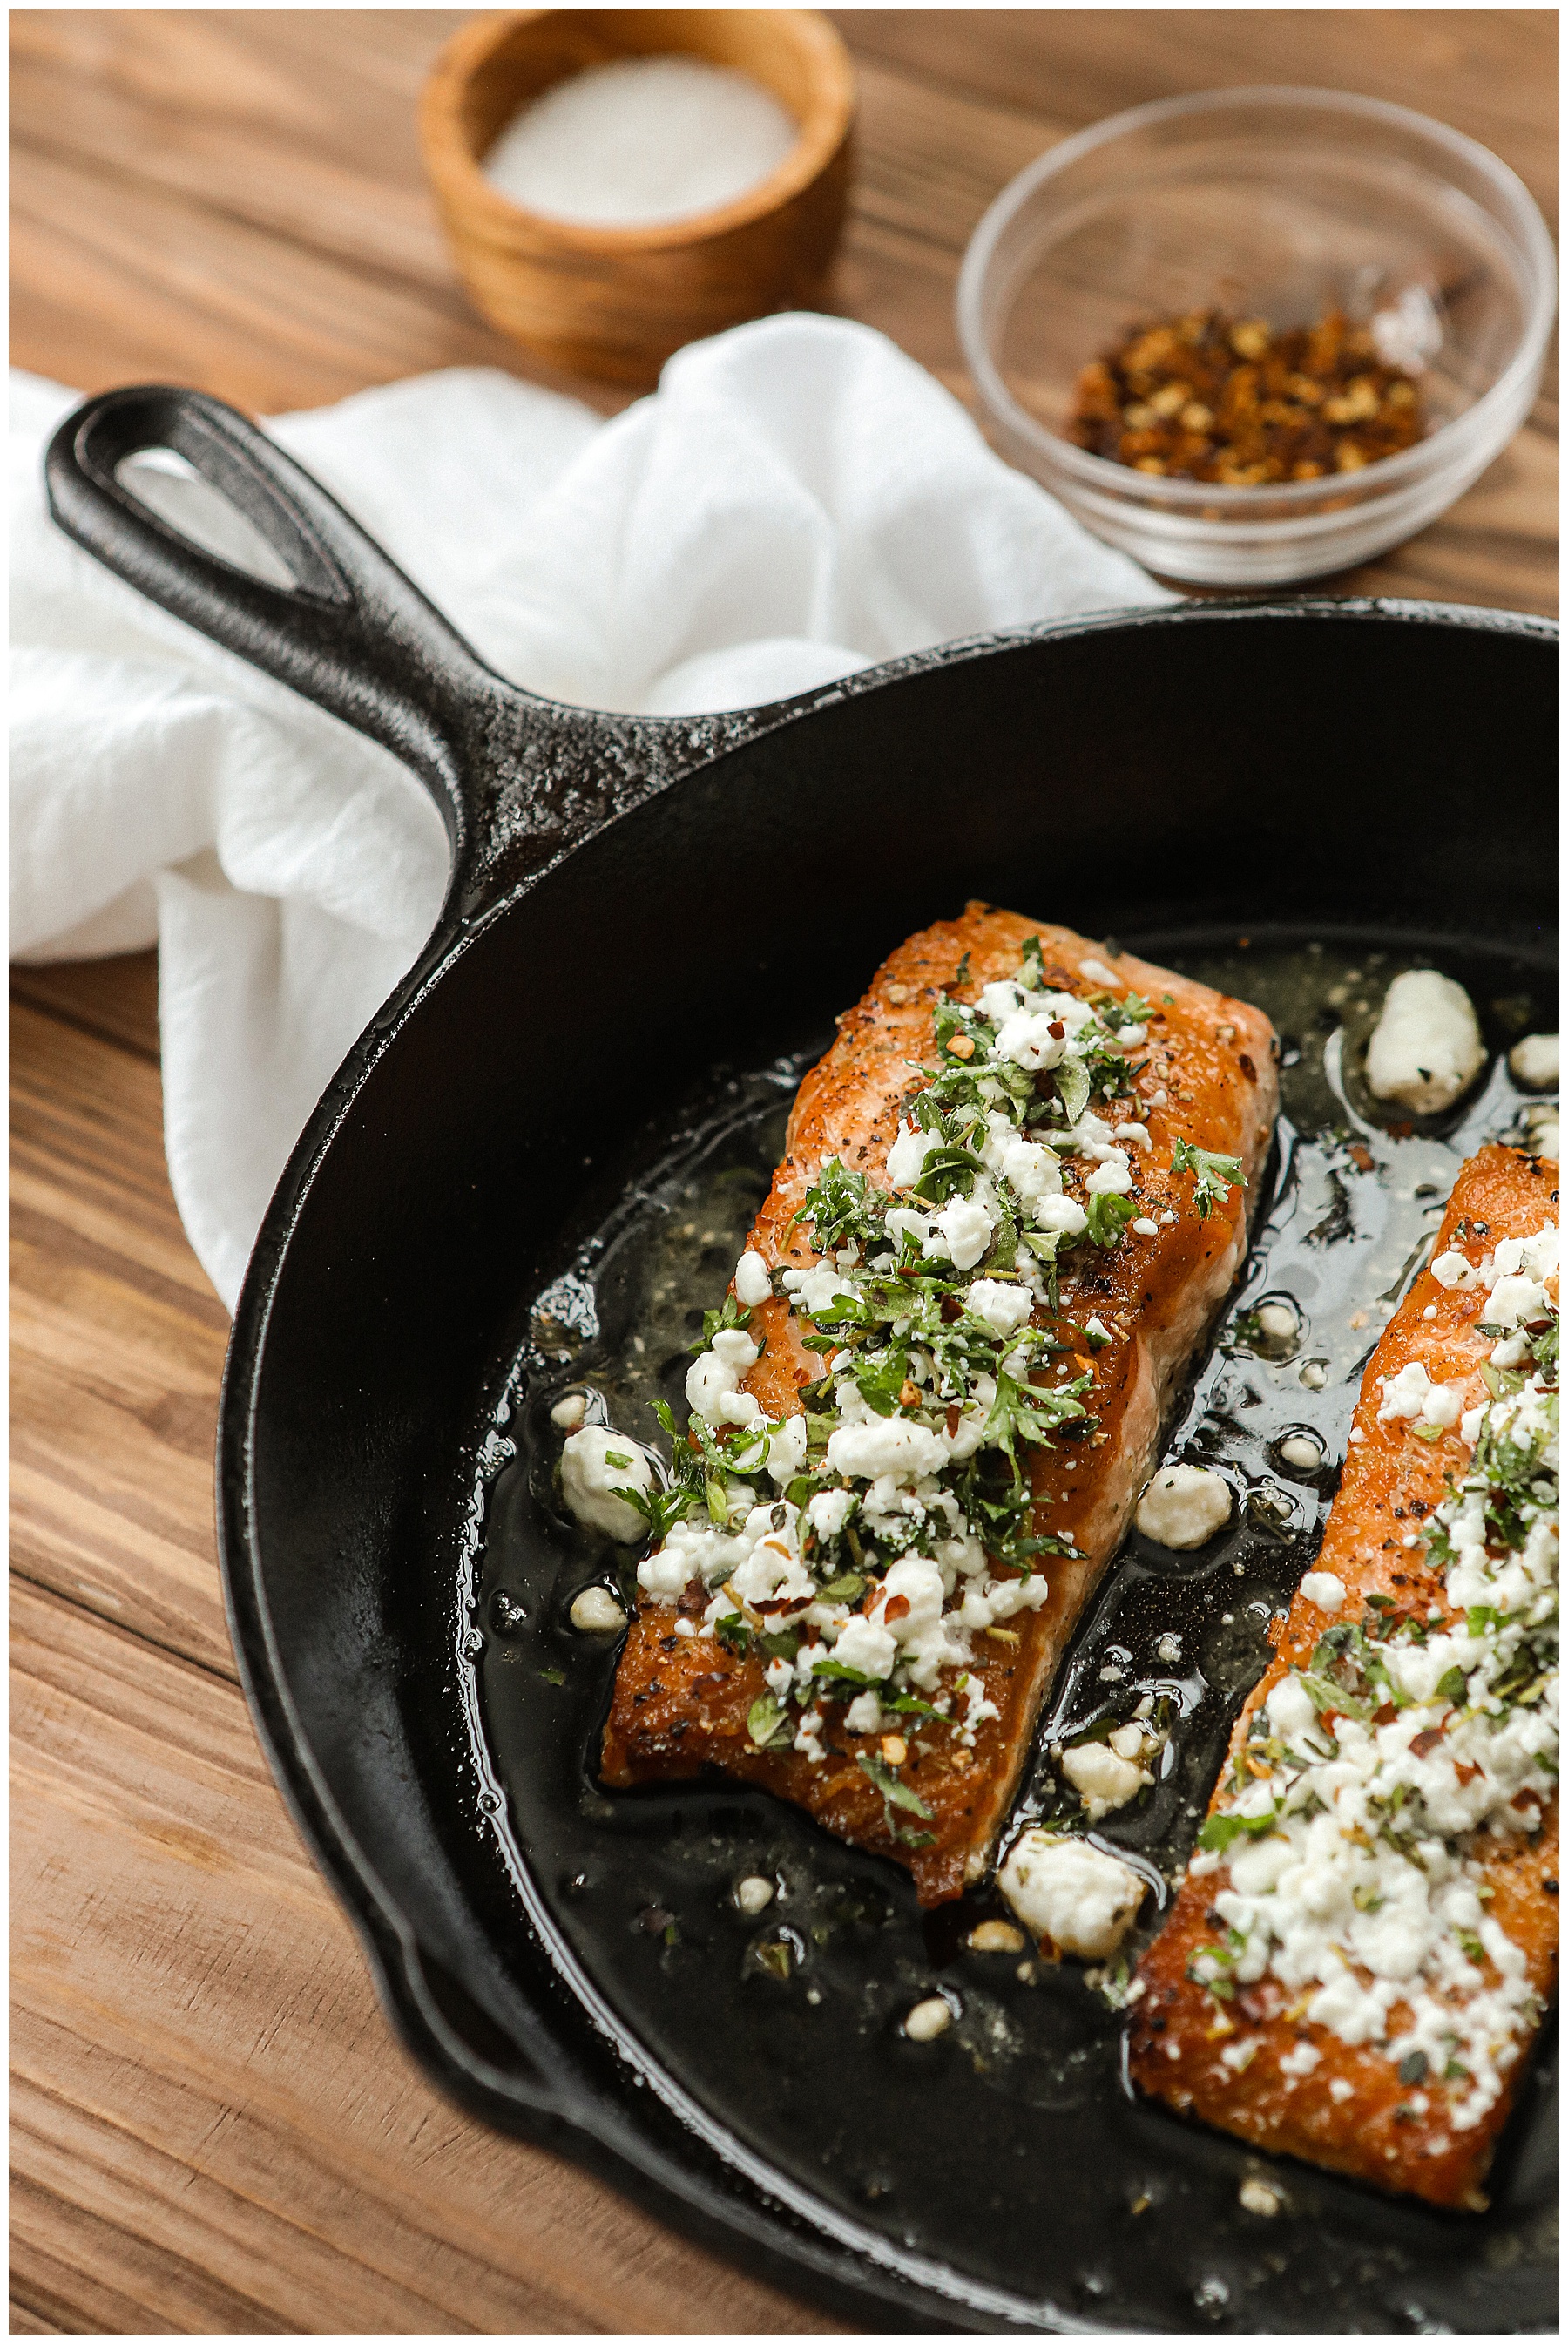 Salmon with goat cheese & herbs